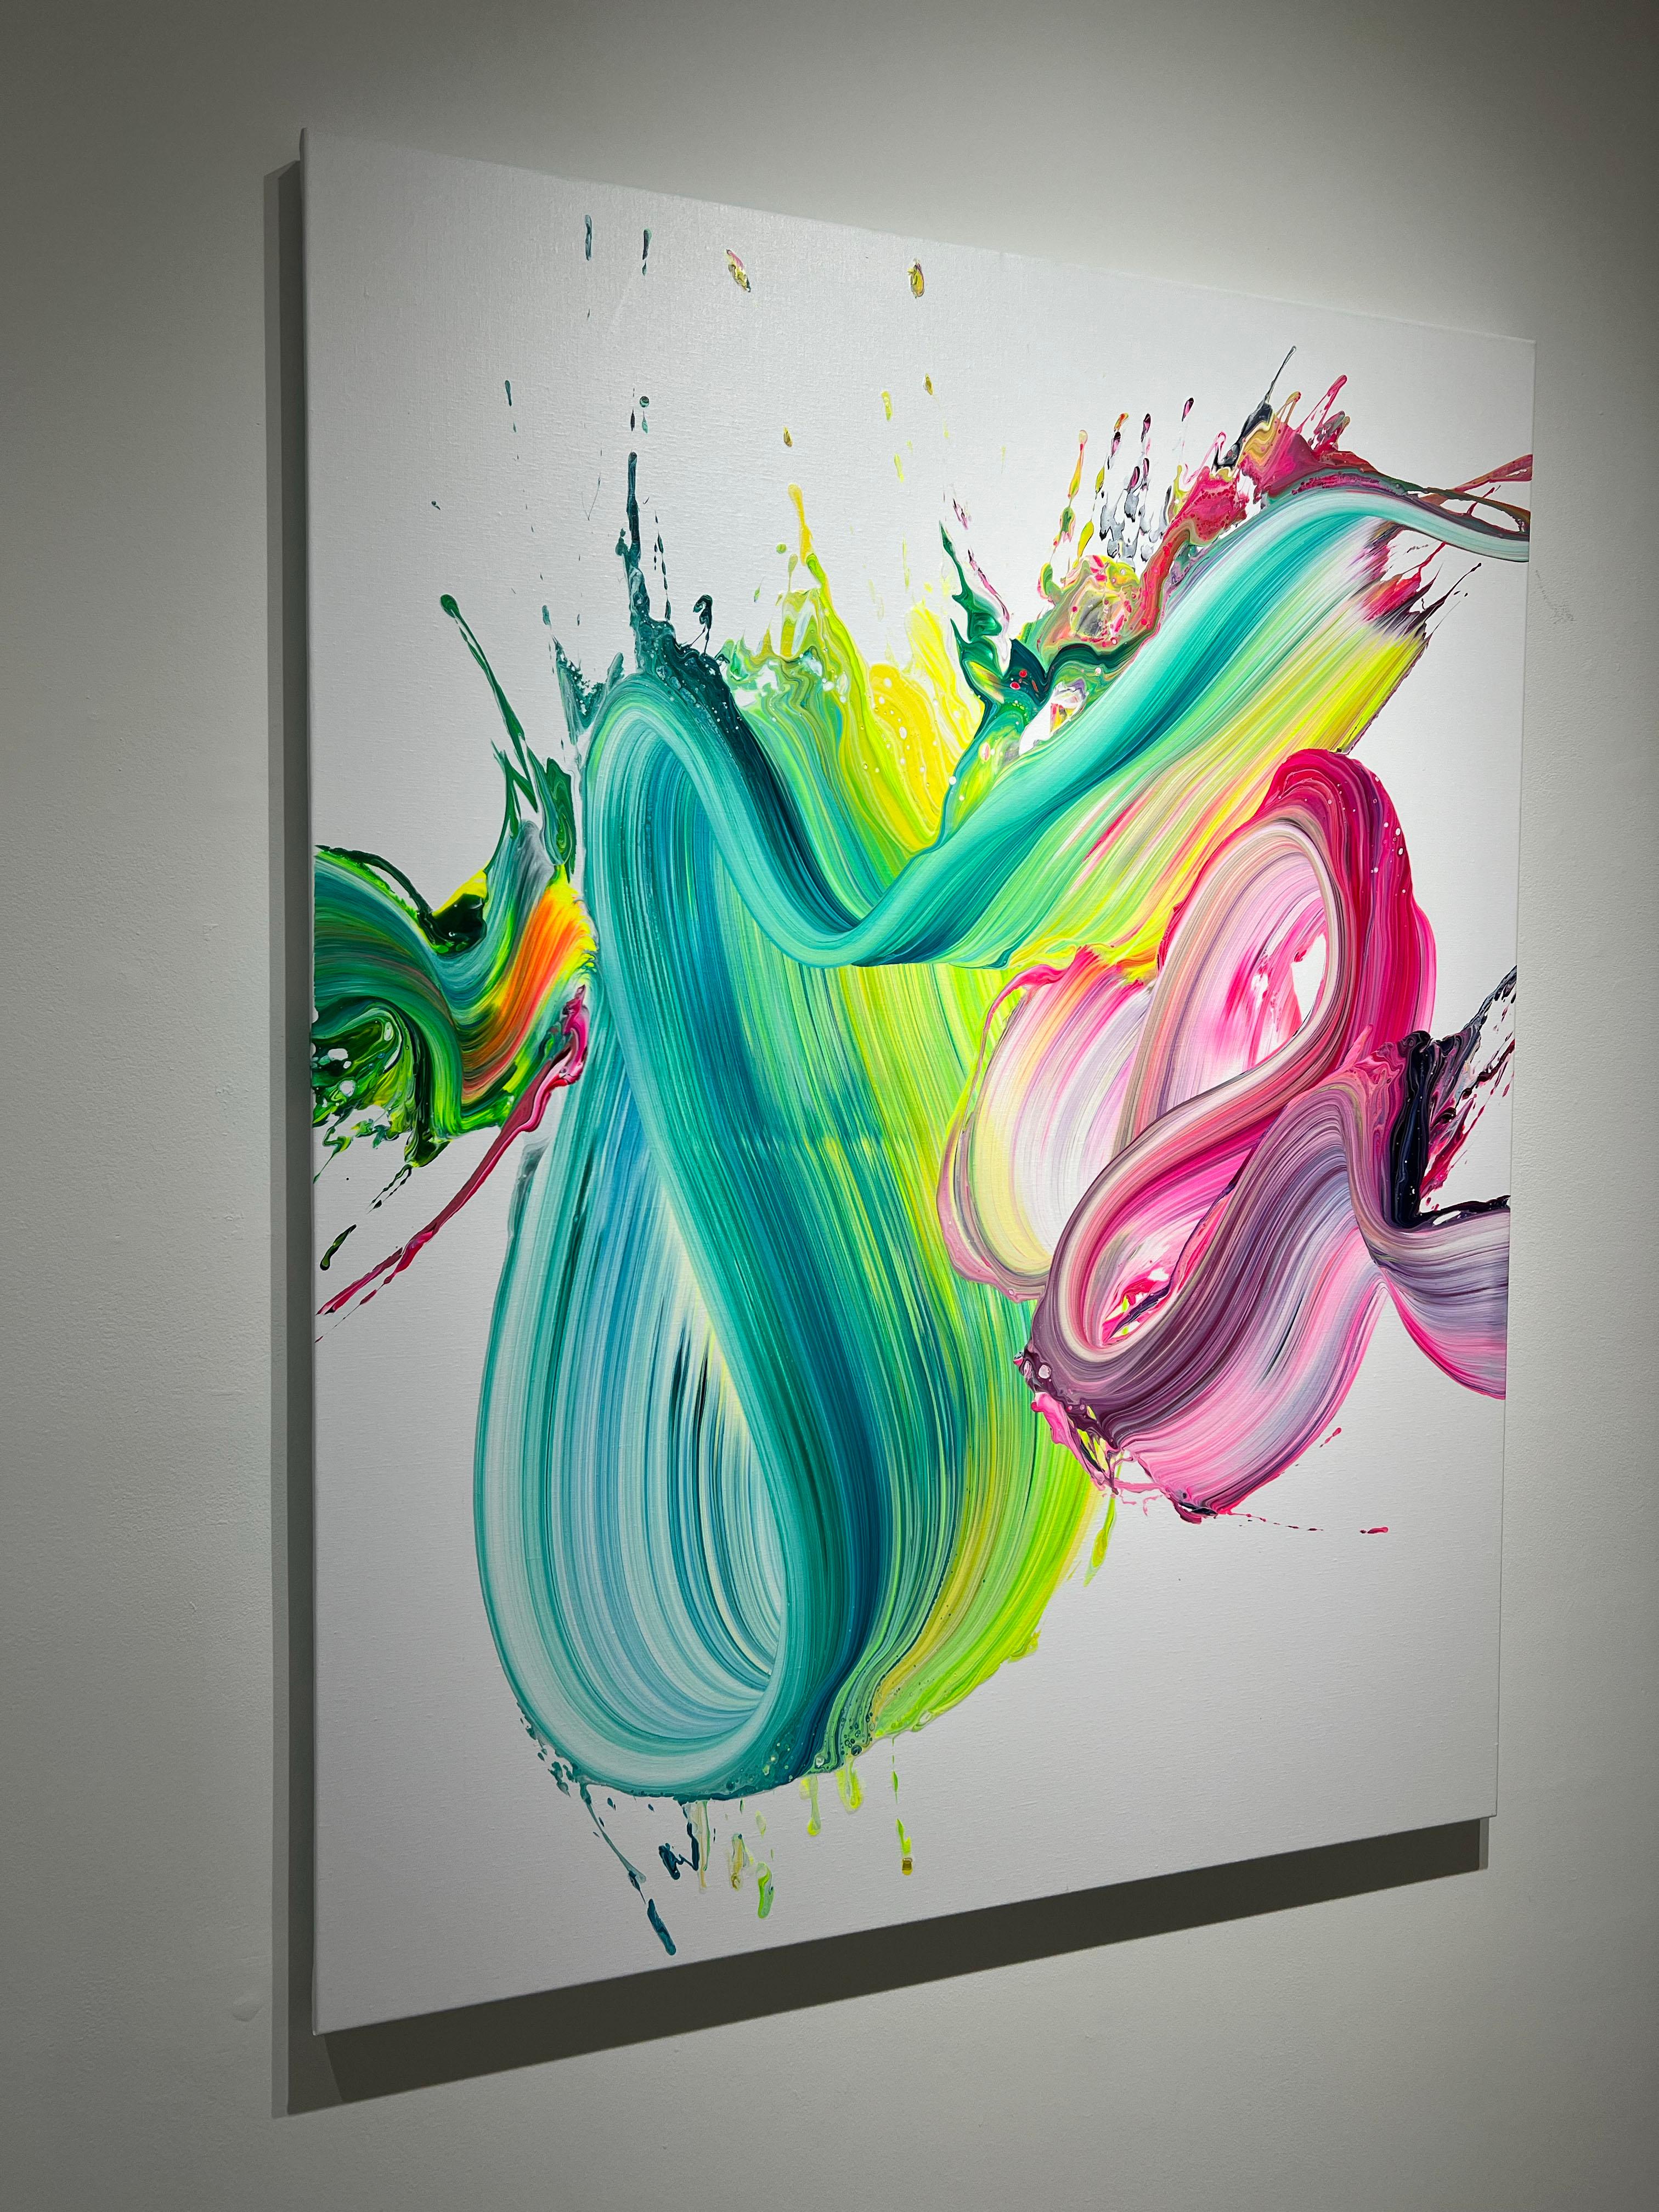 AV 889 -  A Liquid Abstraction in Green, Yellow, and Pink - Gray Interior Painting by Alex Voinea